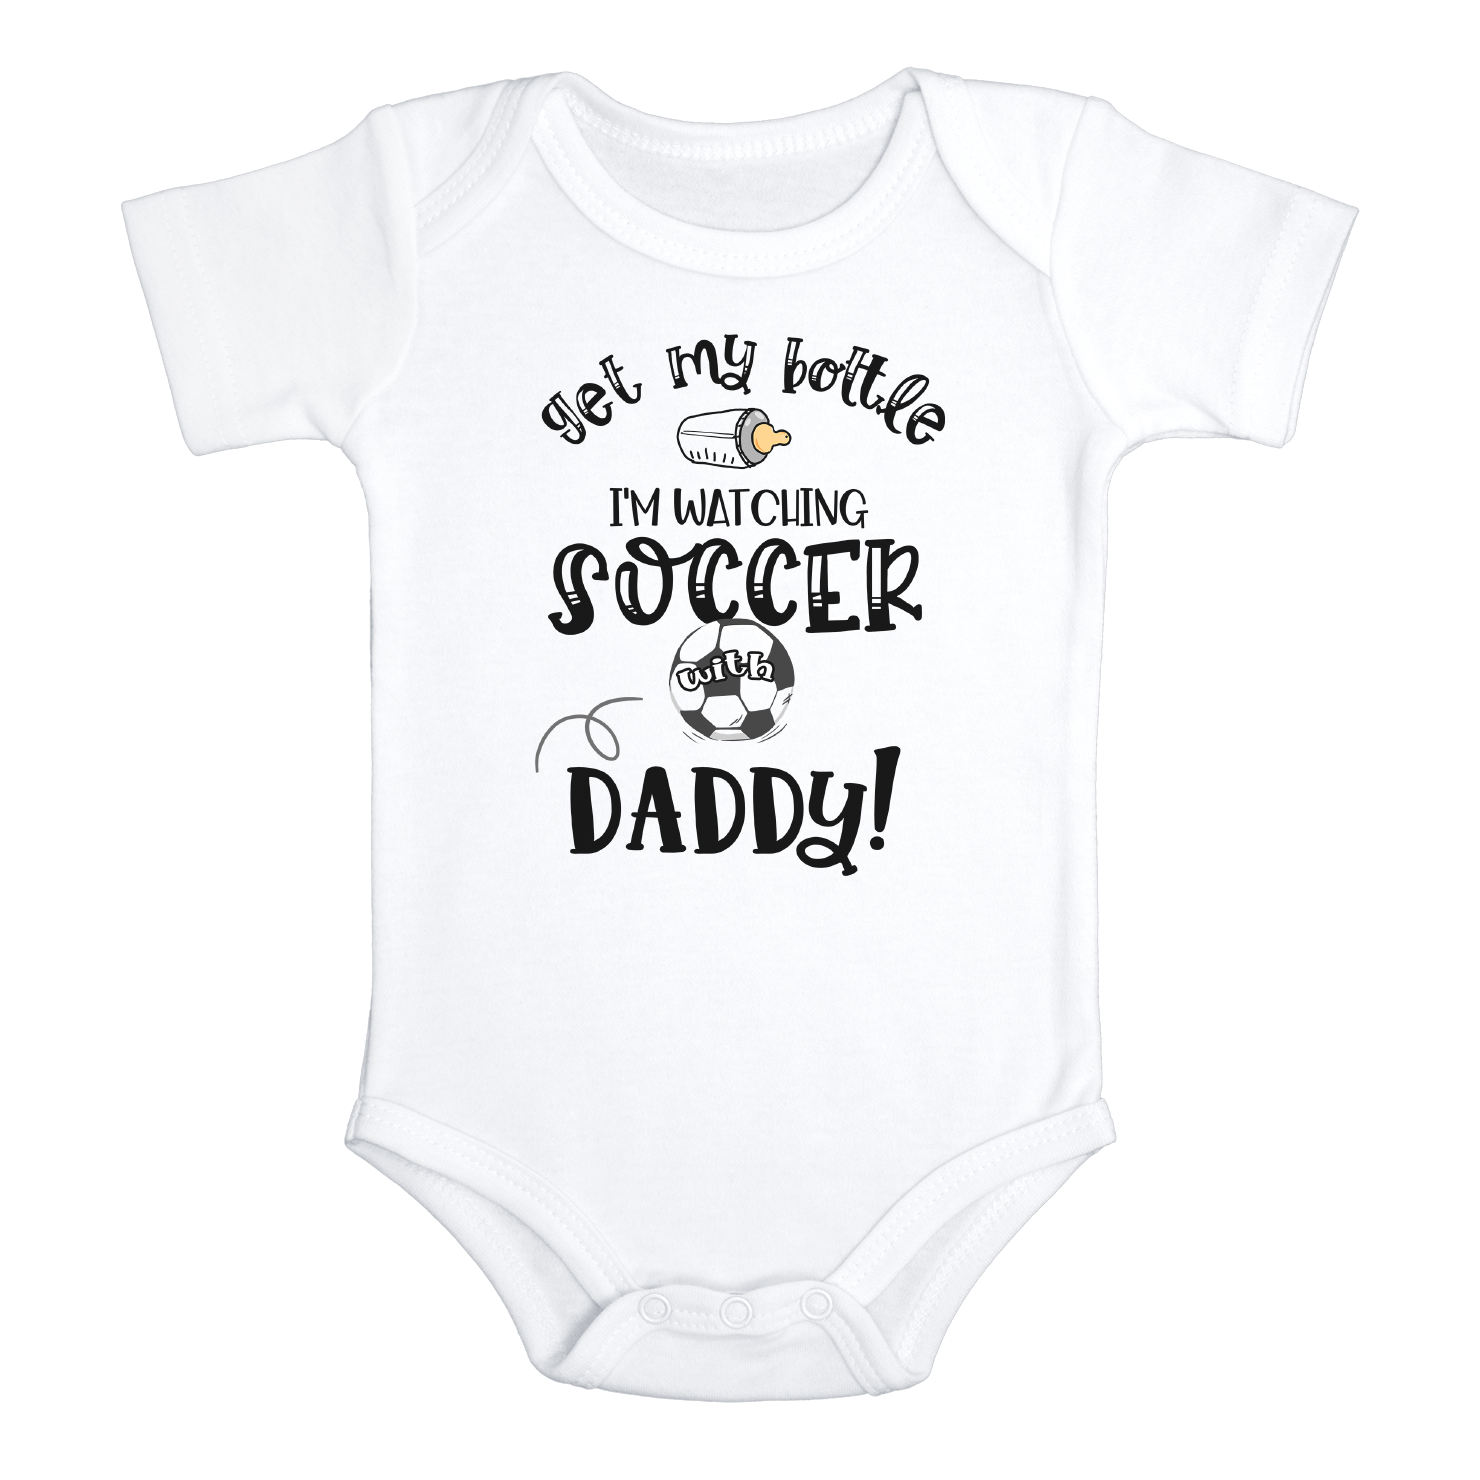 GET MY BOTTLE IM WATCHING SOCCER WITH DADDY Funny Baby Bodysuit Cute Soccer Onesie White